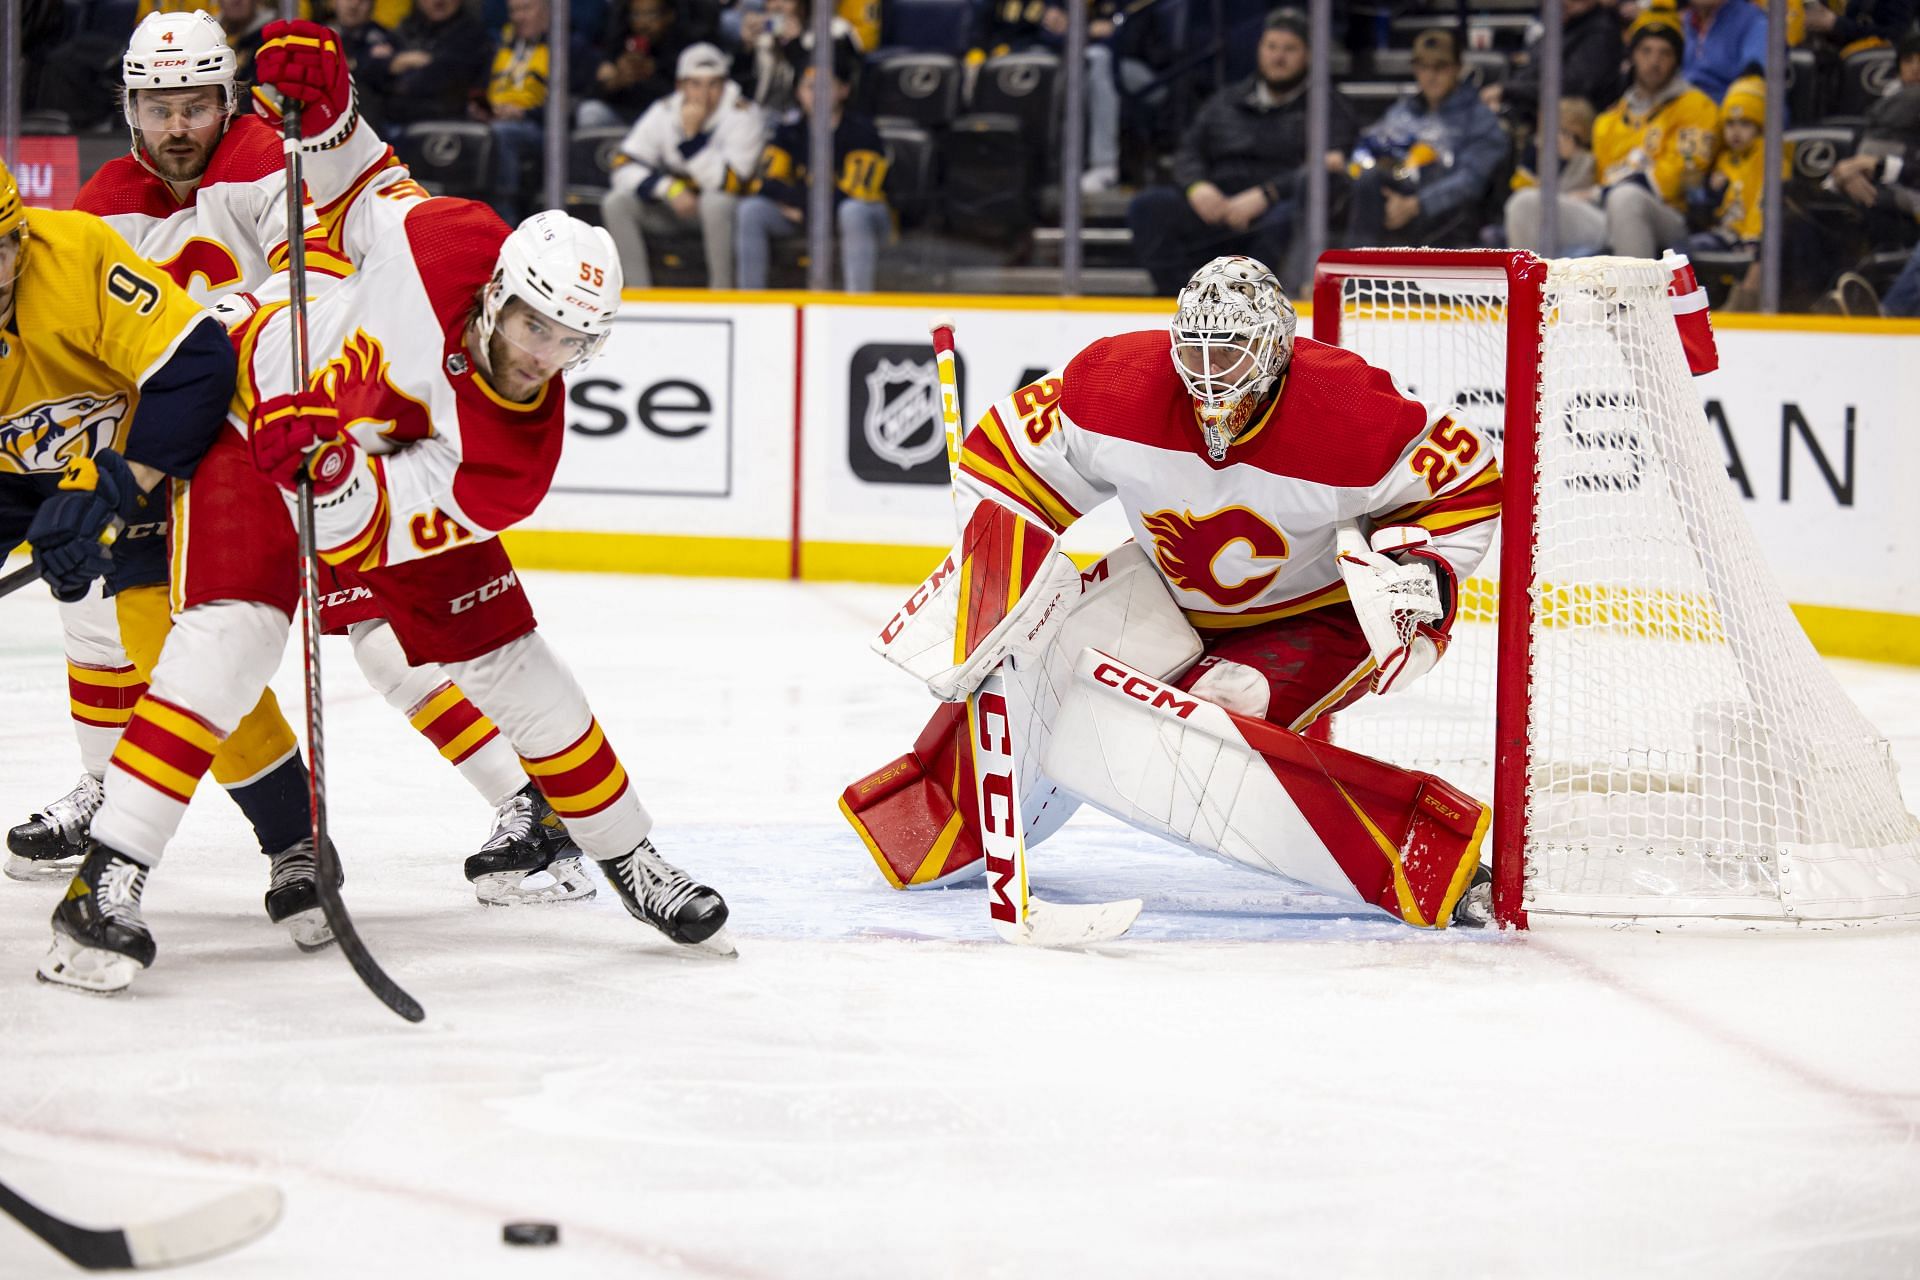 Calgary Flames vs Nashville Predators How and where to watch NHL on TV, live stream, channel list, and more